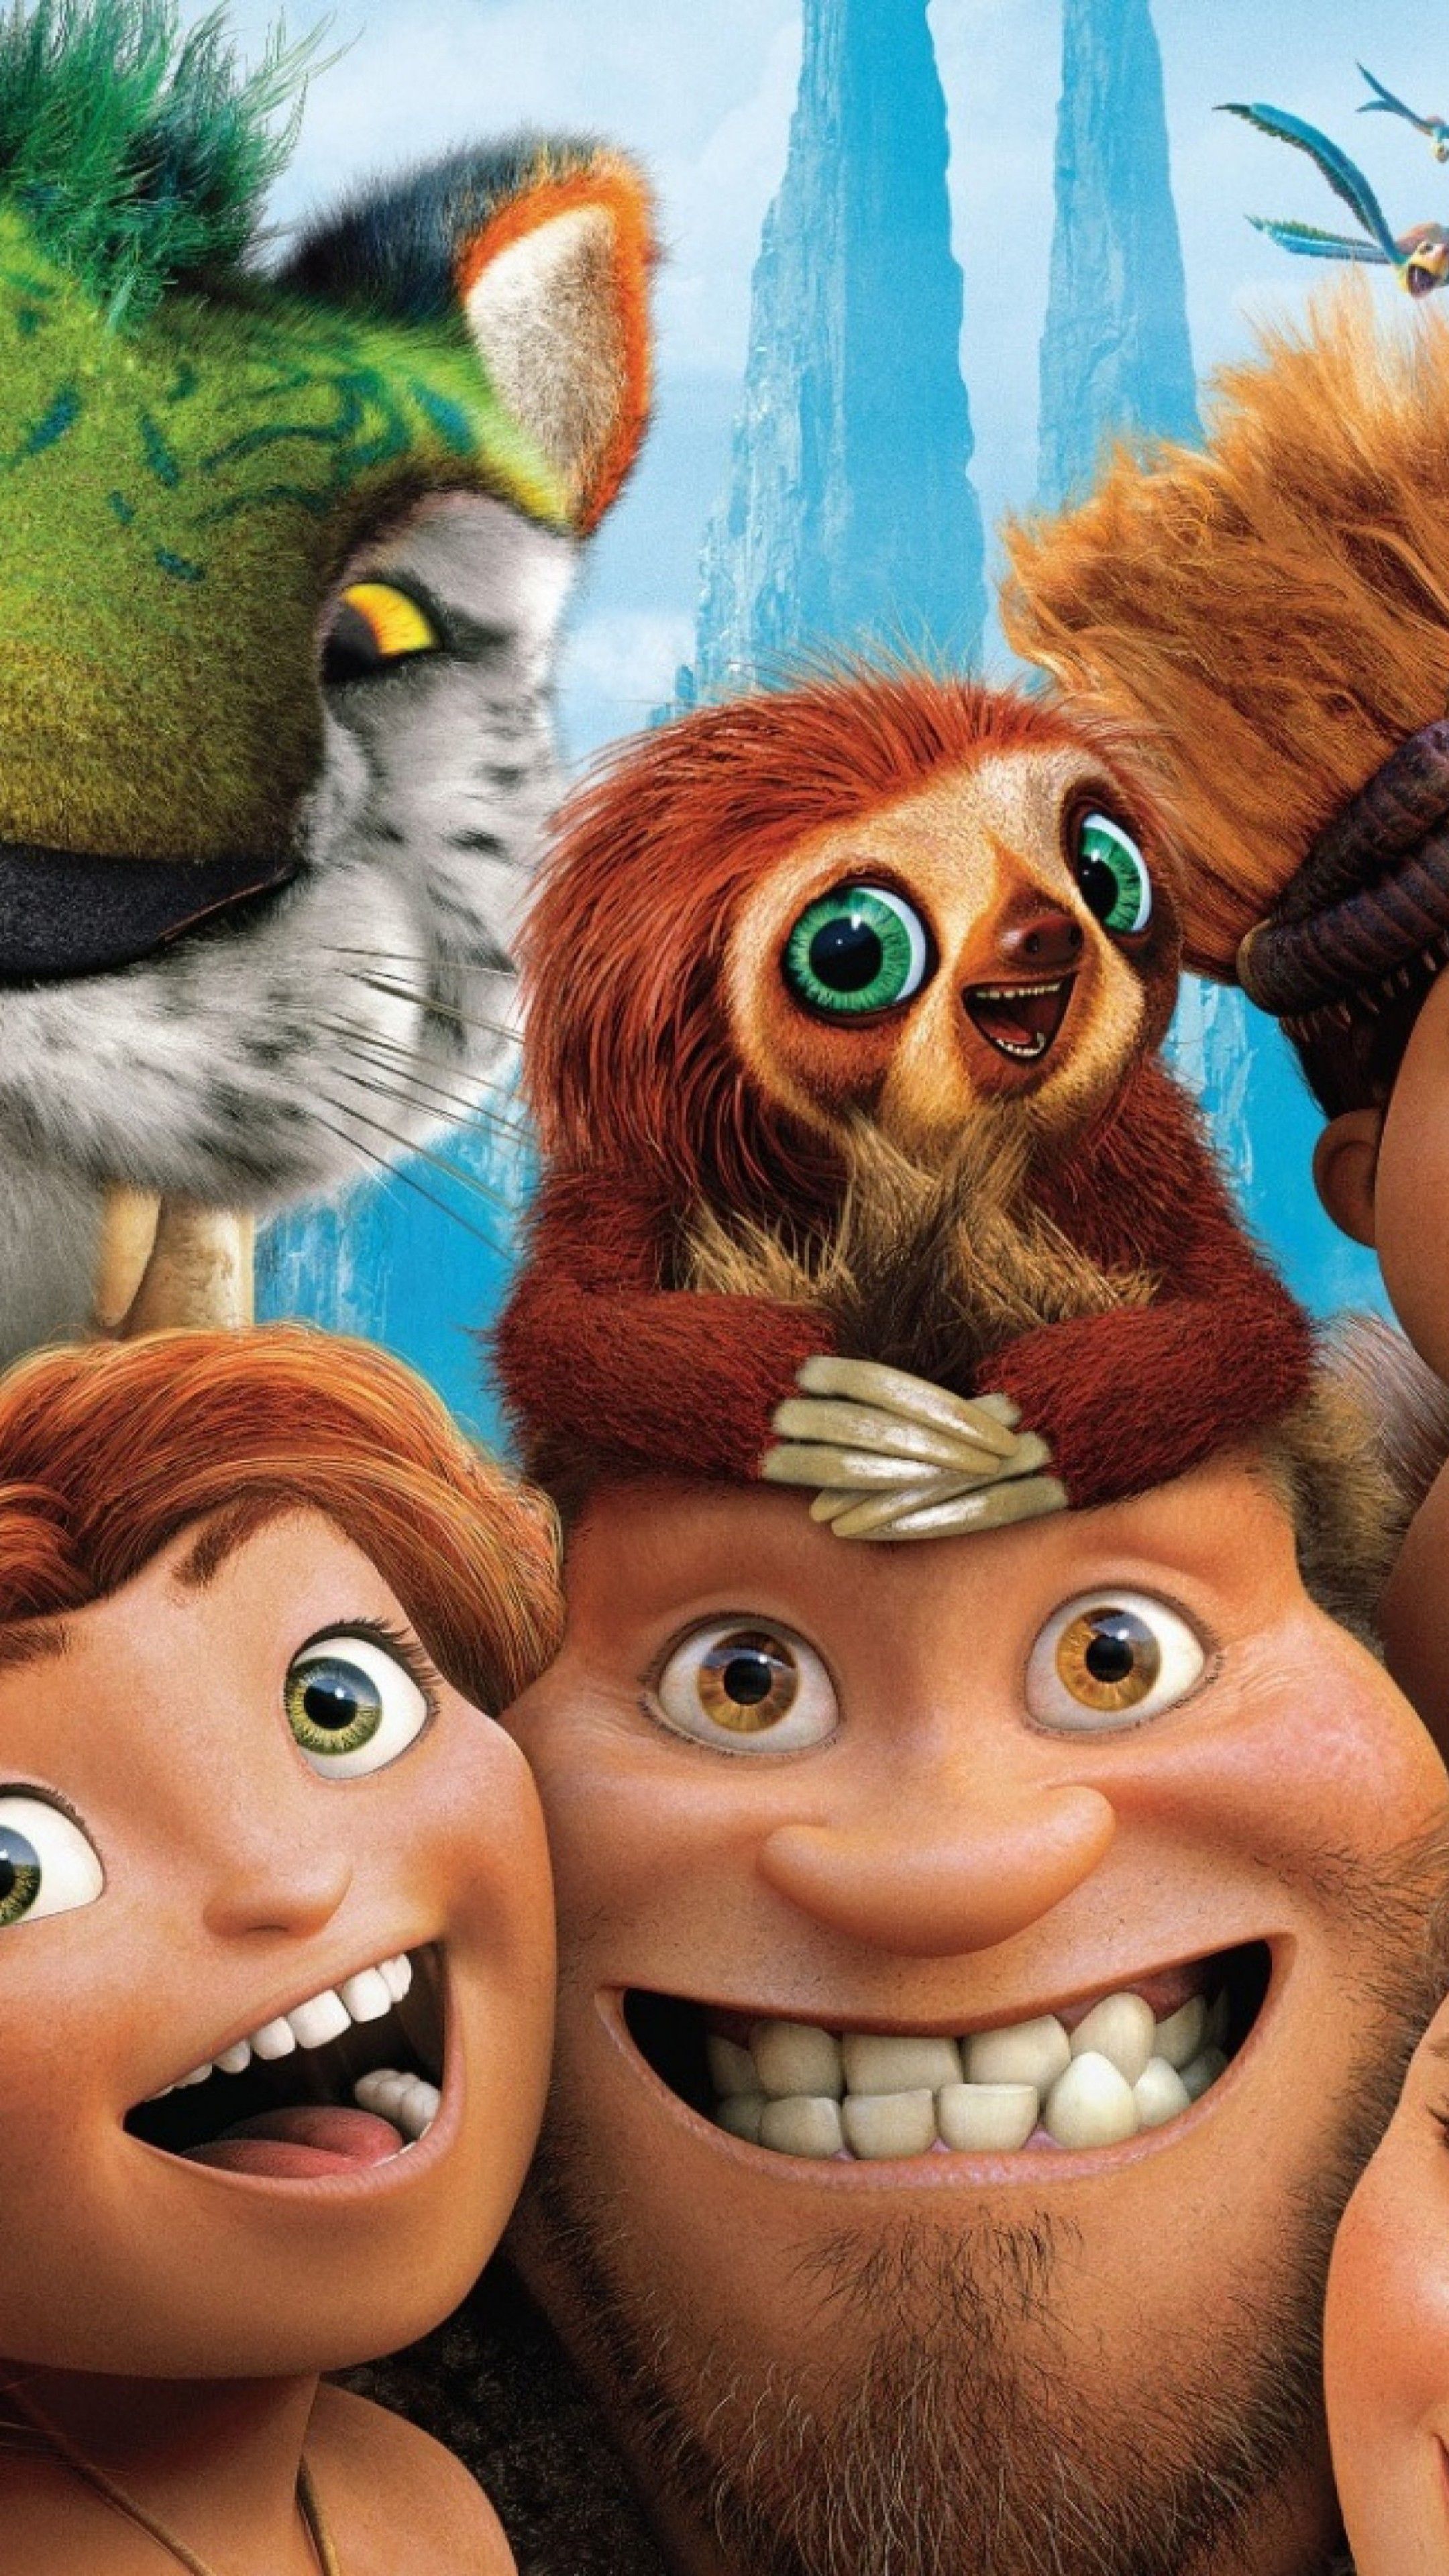 Wallpaper The Croods 5k, best animation movies, Movies